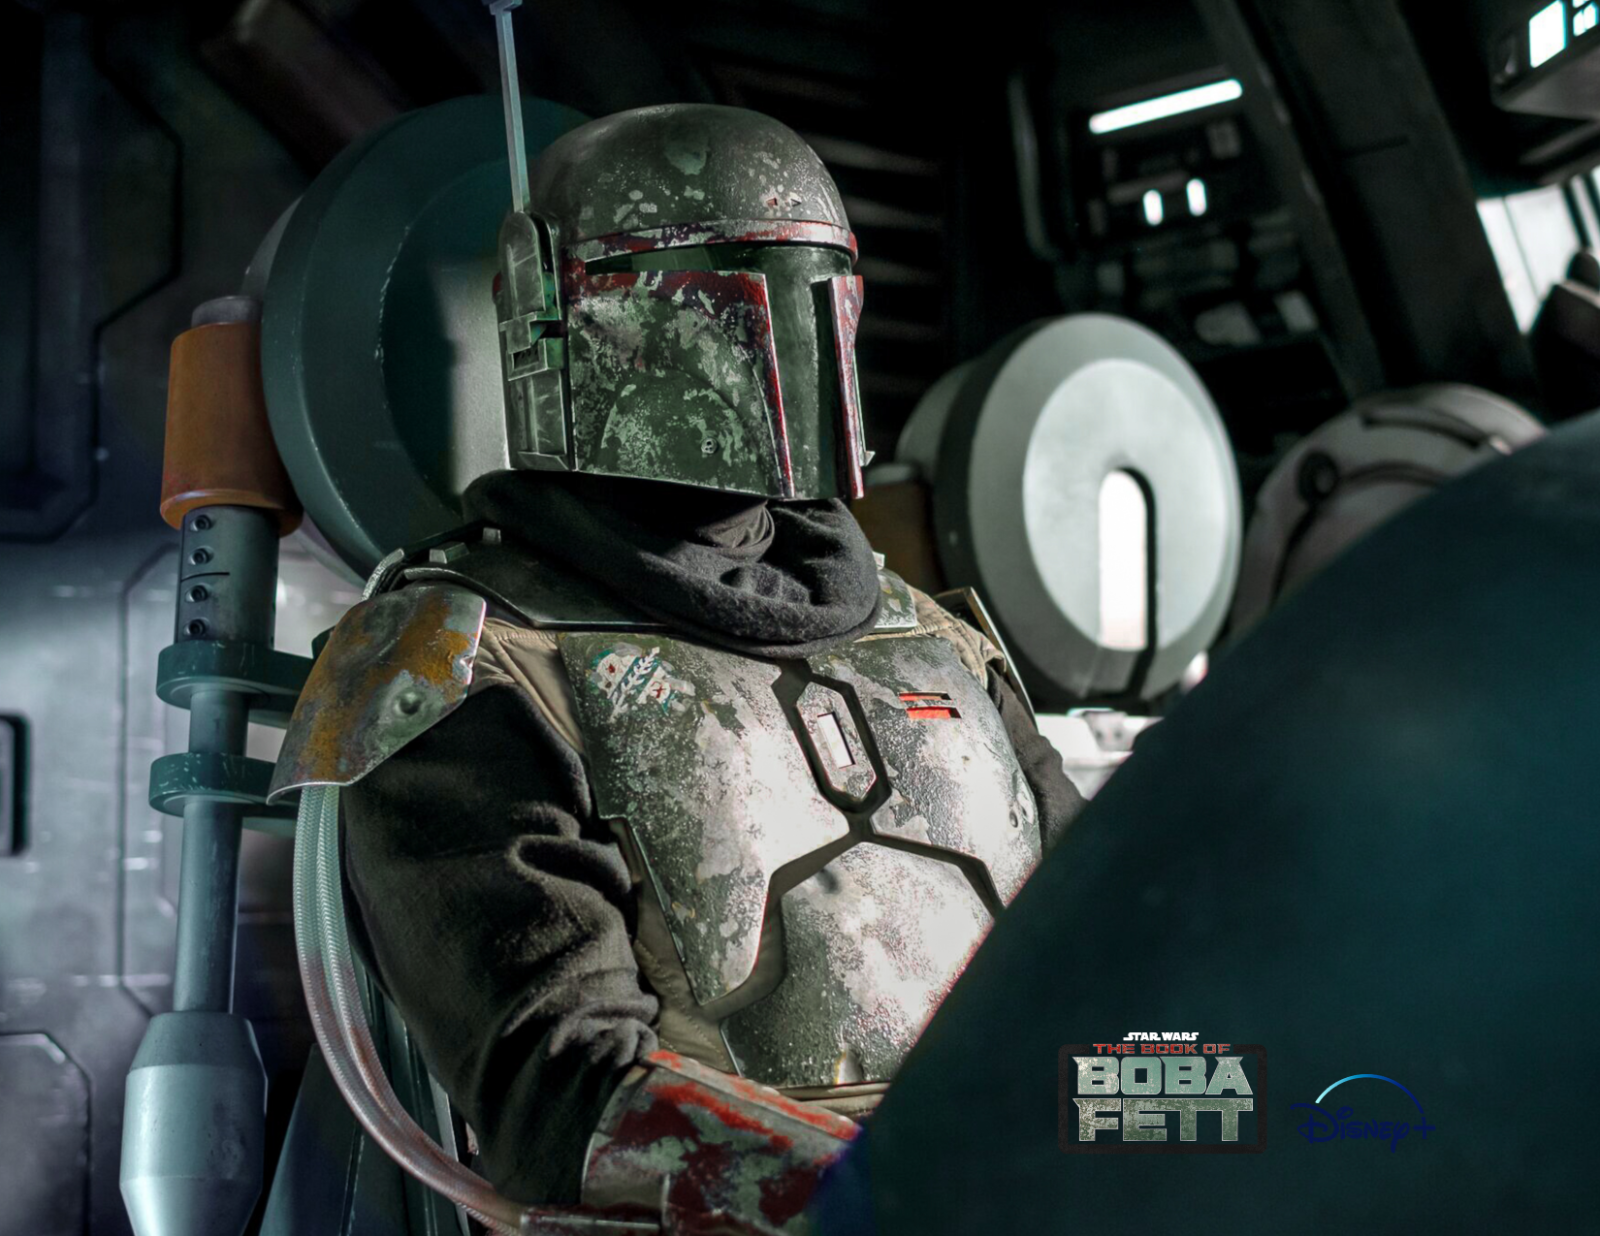 The Book Of Boba Fett 2021 Wallpapers